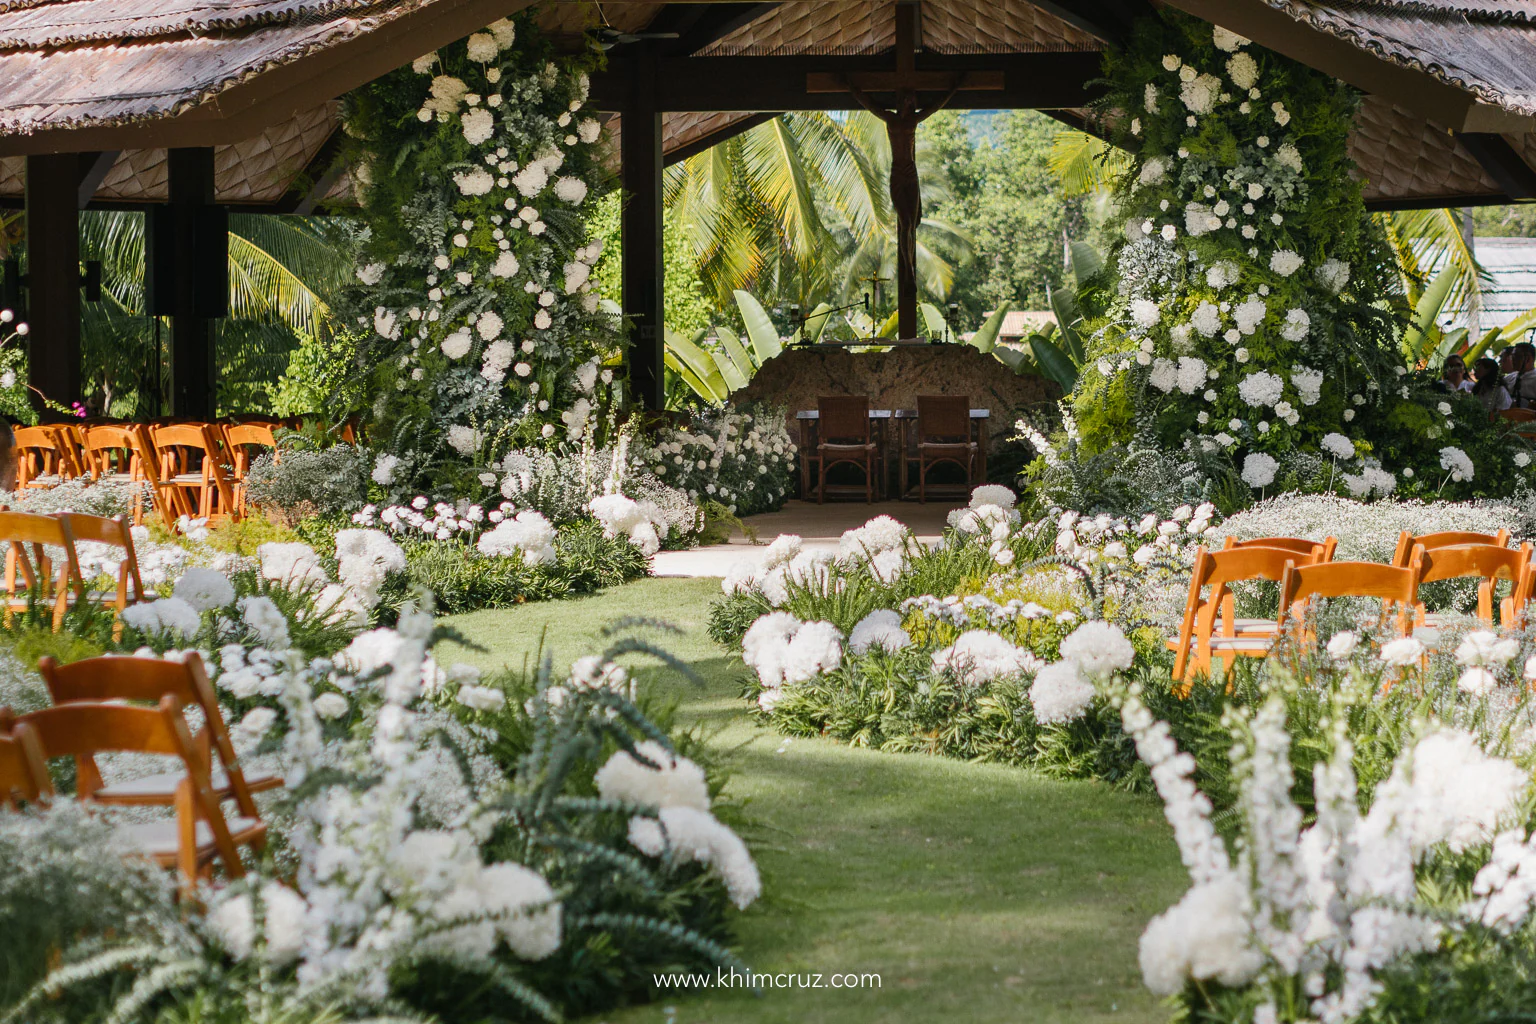 pillar florals standing to welcome the bride for this outdoor destination wedding ceremony